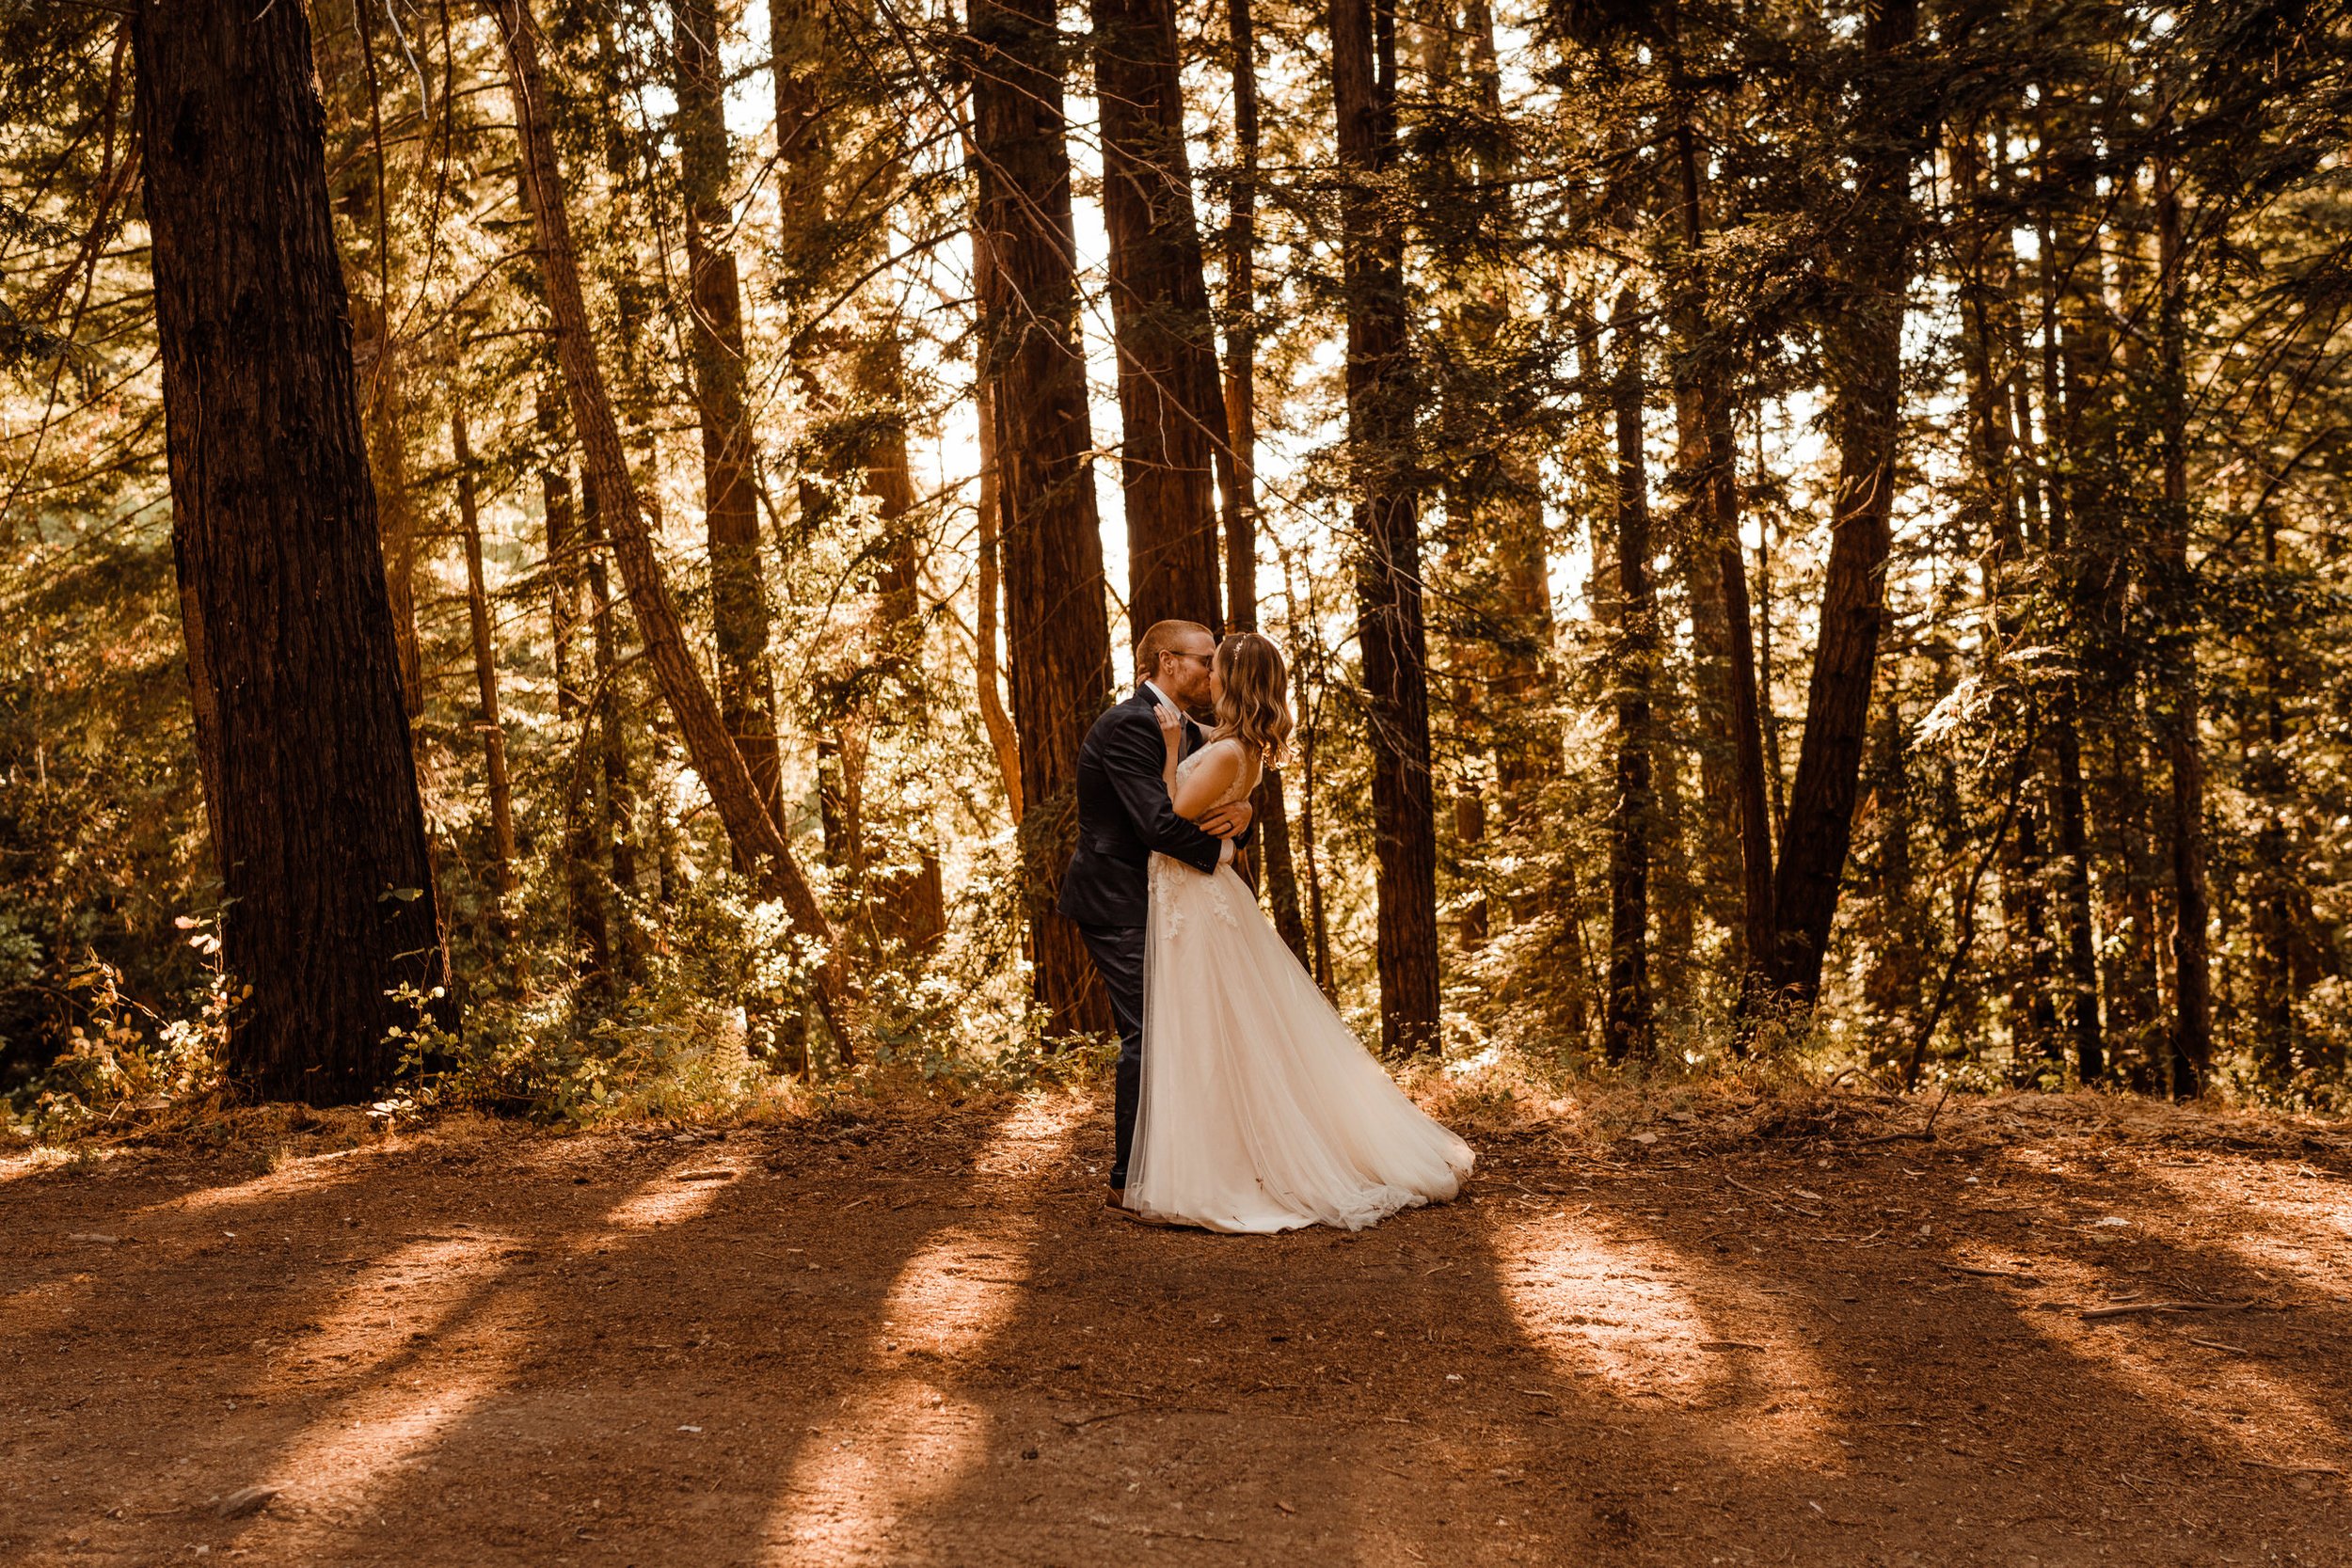 Wedding-in-the-Woods-Bride-and-Groom-Sunlit-Pictures-Beneath-Redwood-Forest (30).jpg